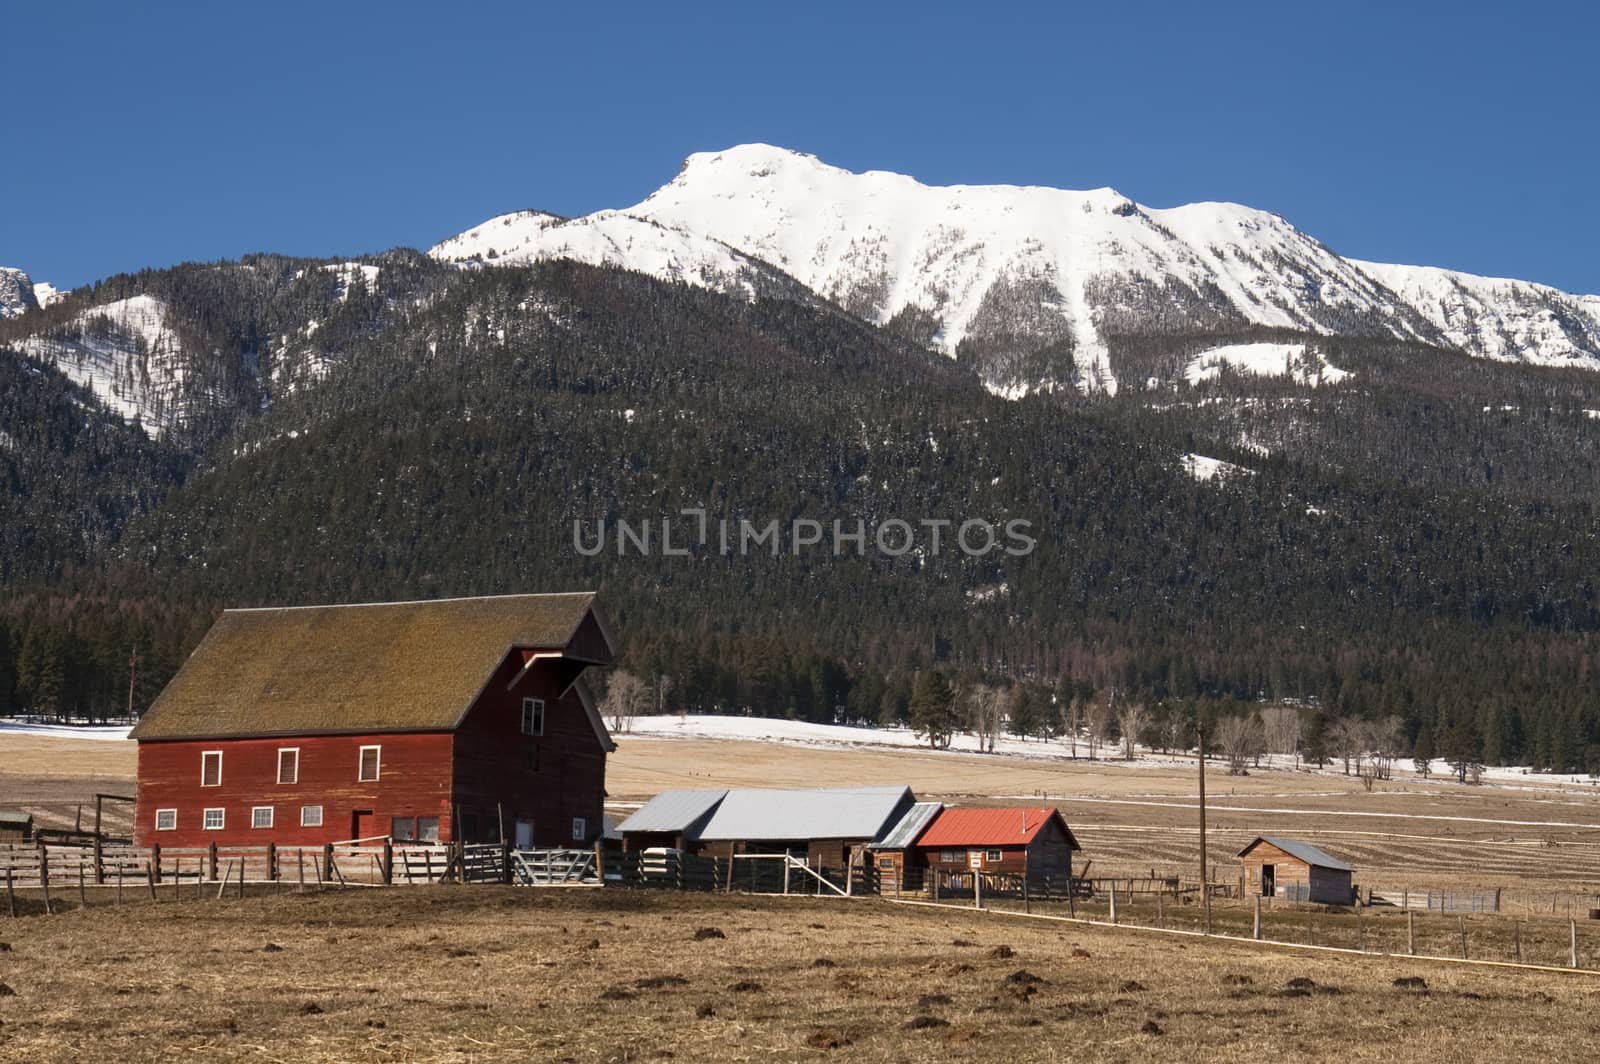 Red Barn Outbuilding Mountain Ranch Homestead Western United States by ChrisBoswell